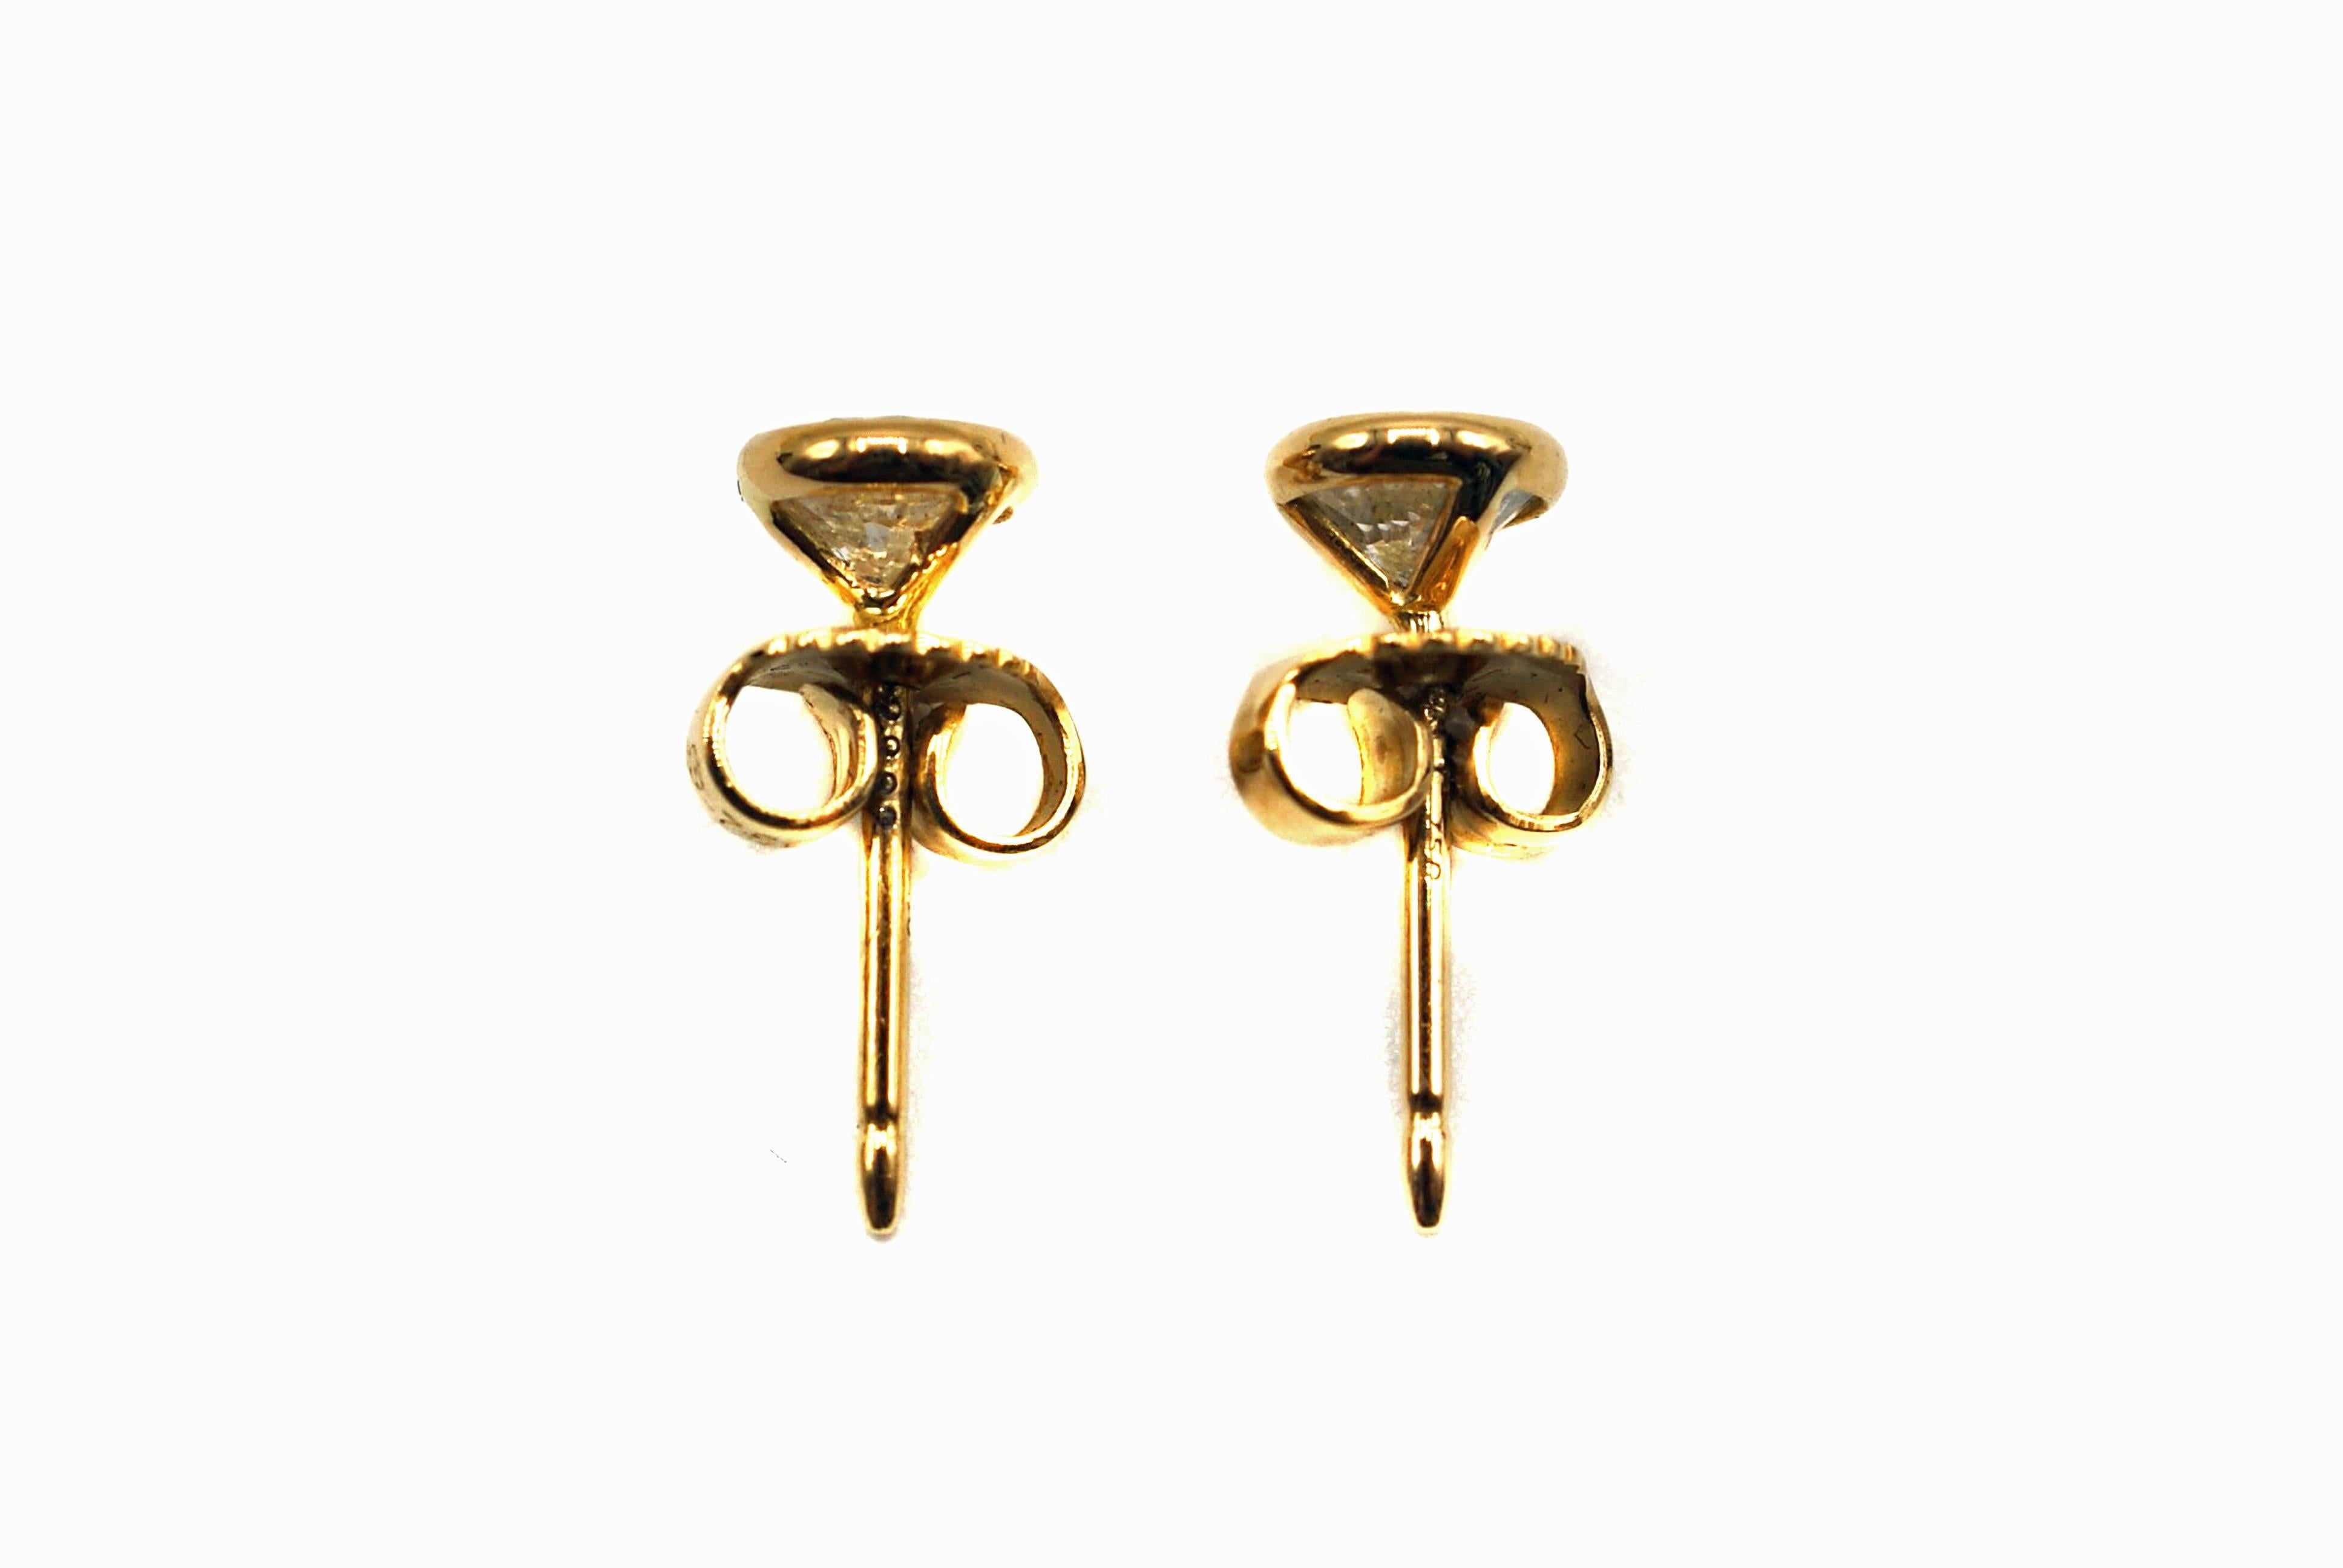 Rive Gauche Jewelry custom handcrafted 18 Karat yellow gold beautiful pair of round brilliant cut diamond stud earrings. This pair of bright, white and sparkly diamonds have an amazing spread, showing off a much larger size than their actual weight